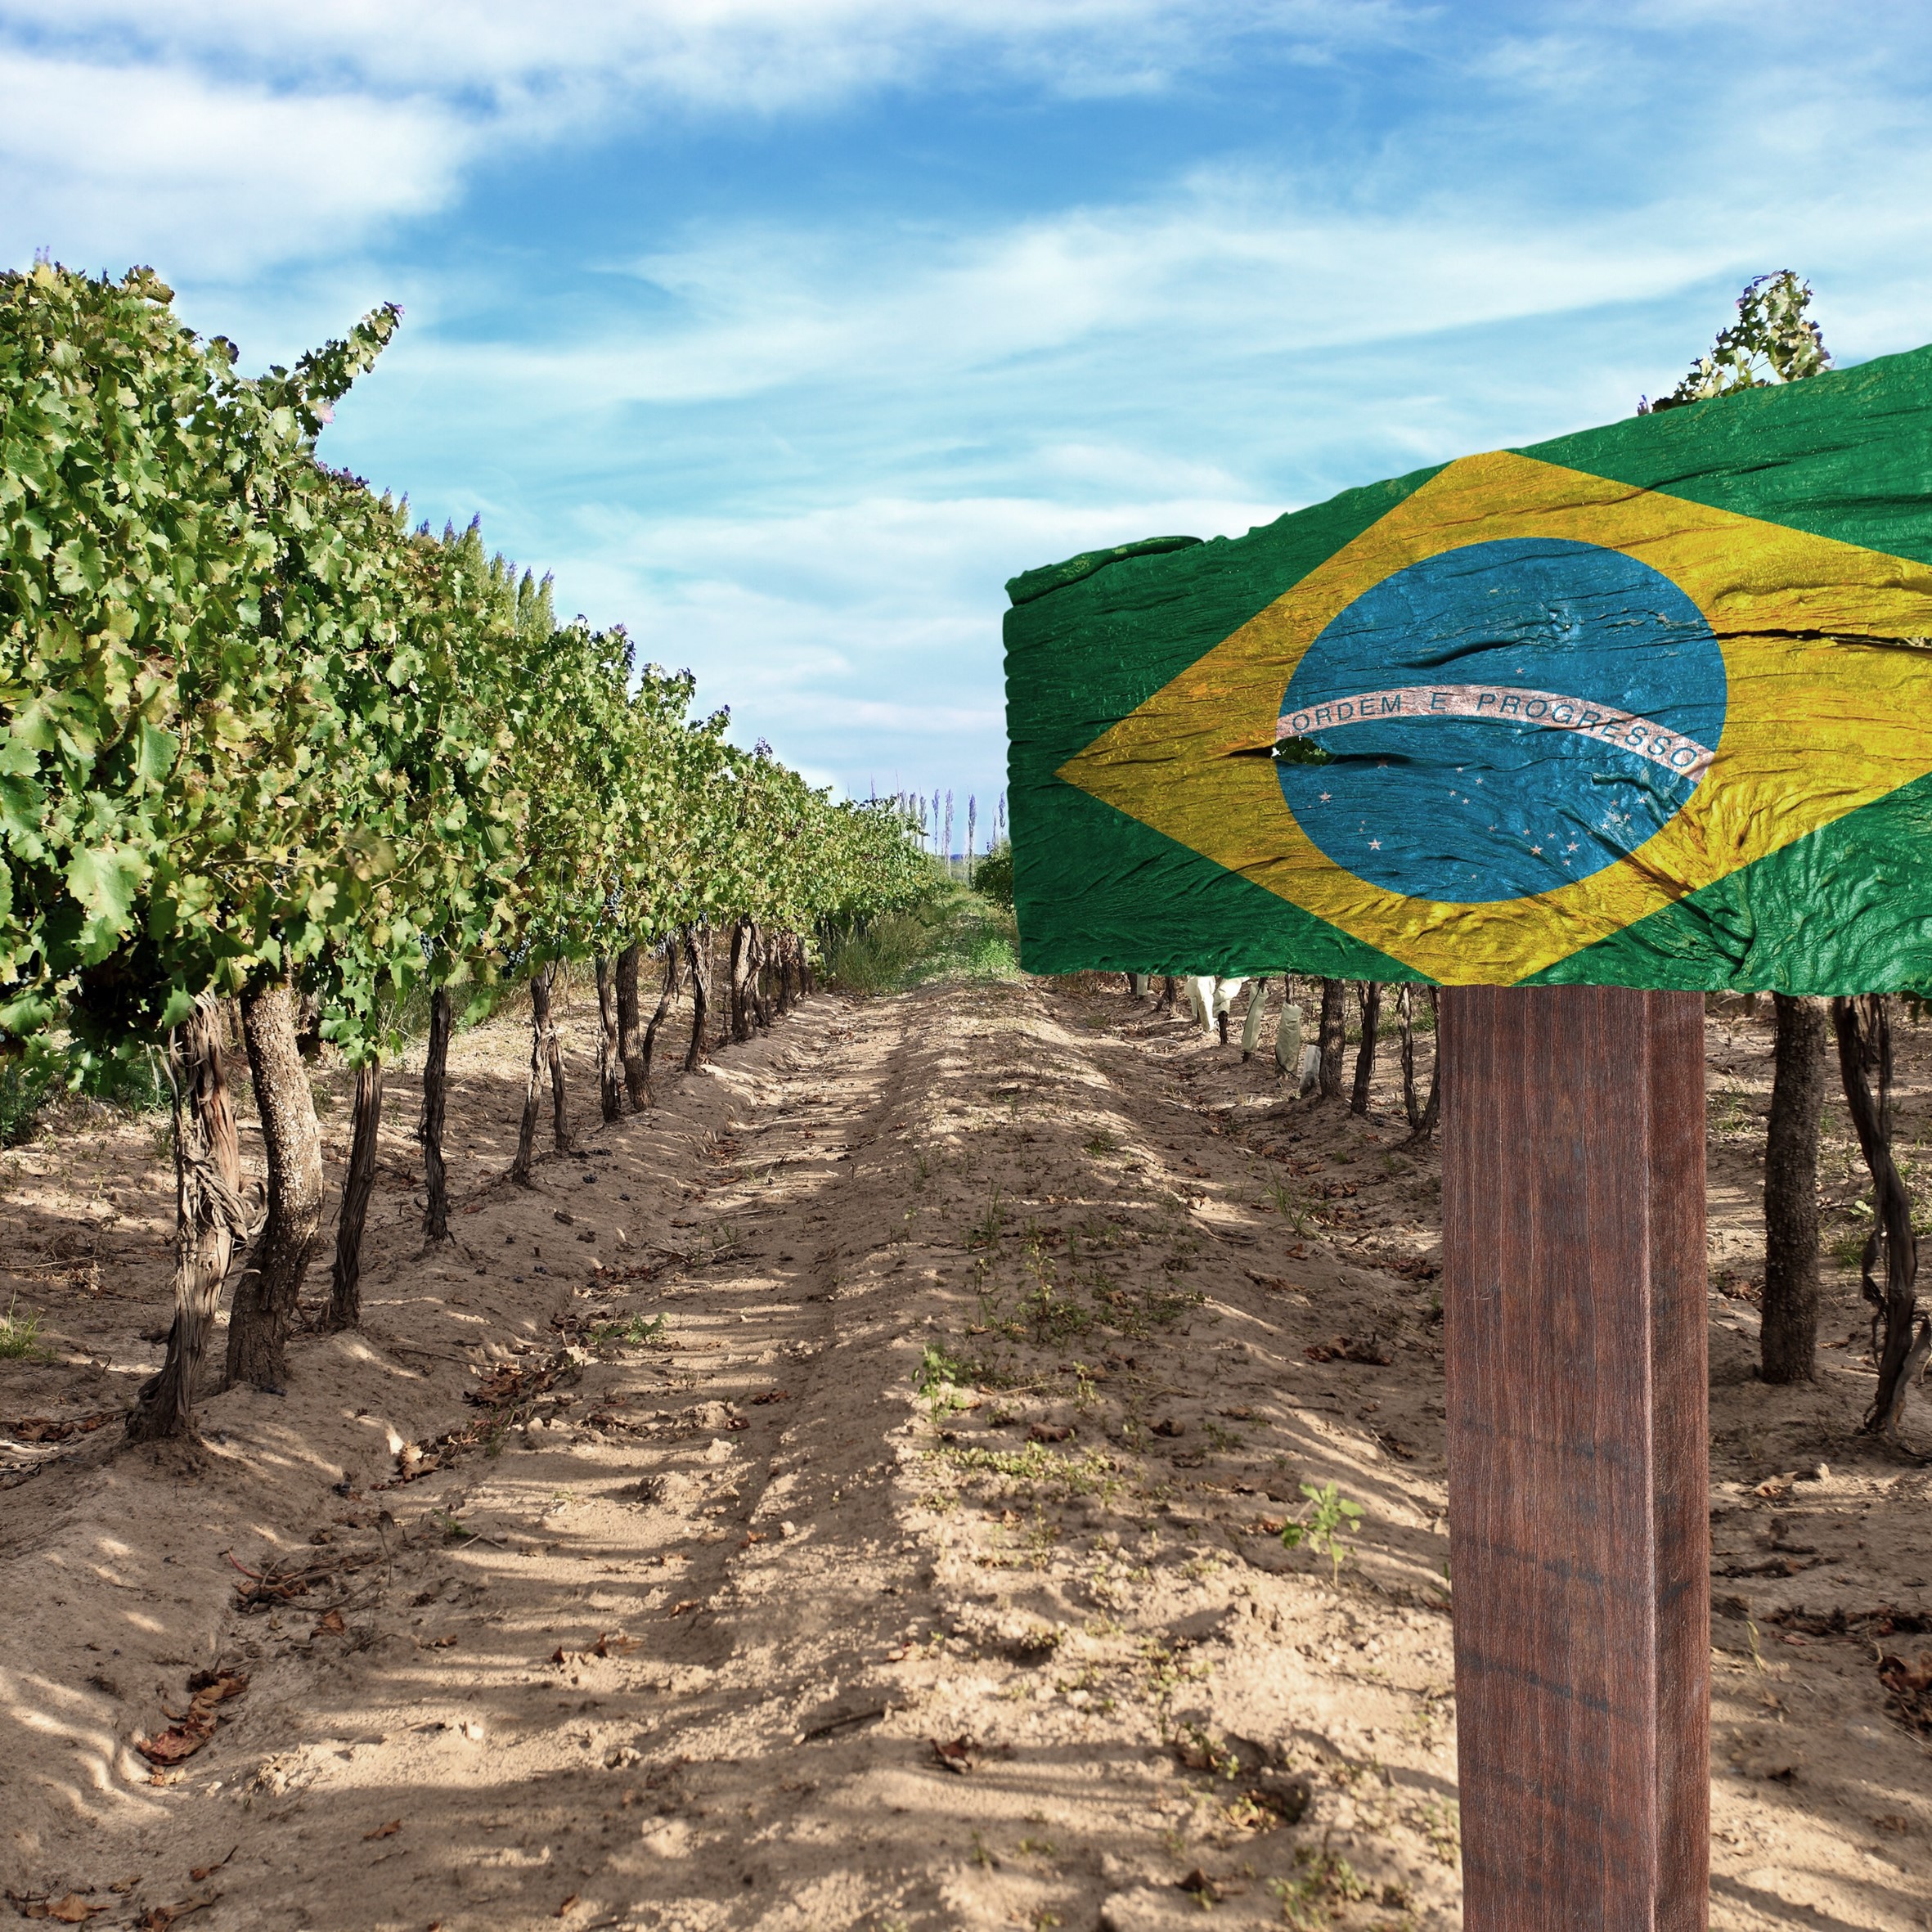 Brazil - Will gin drink wine under the table?